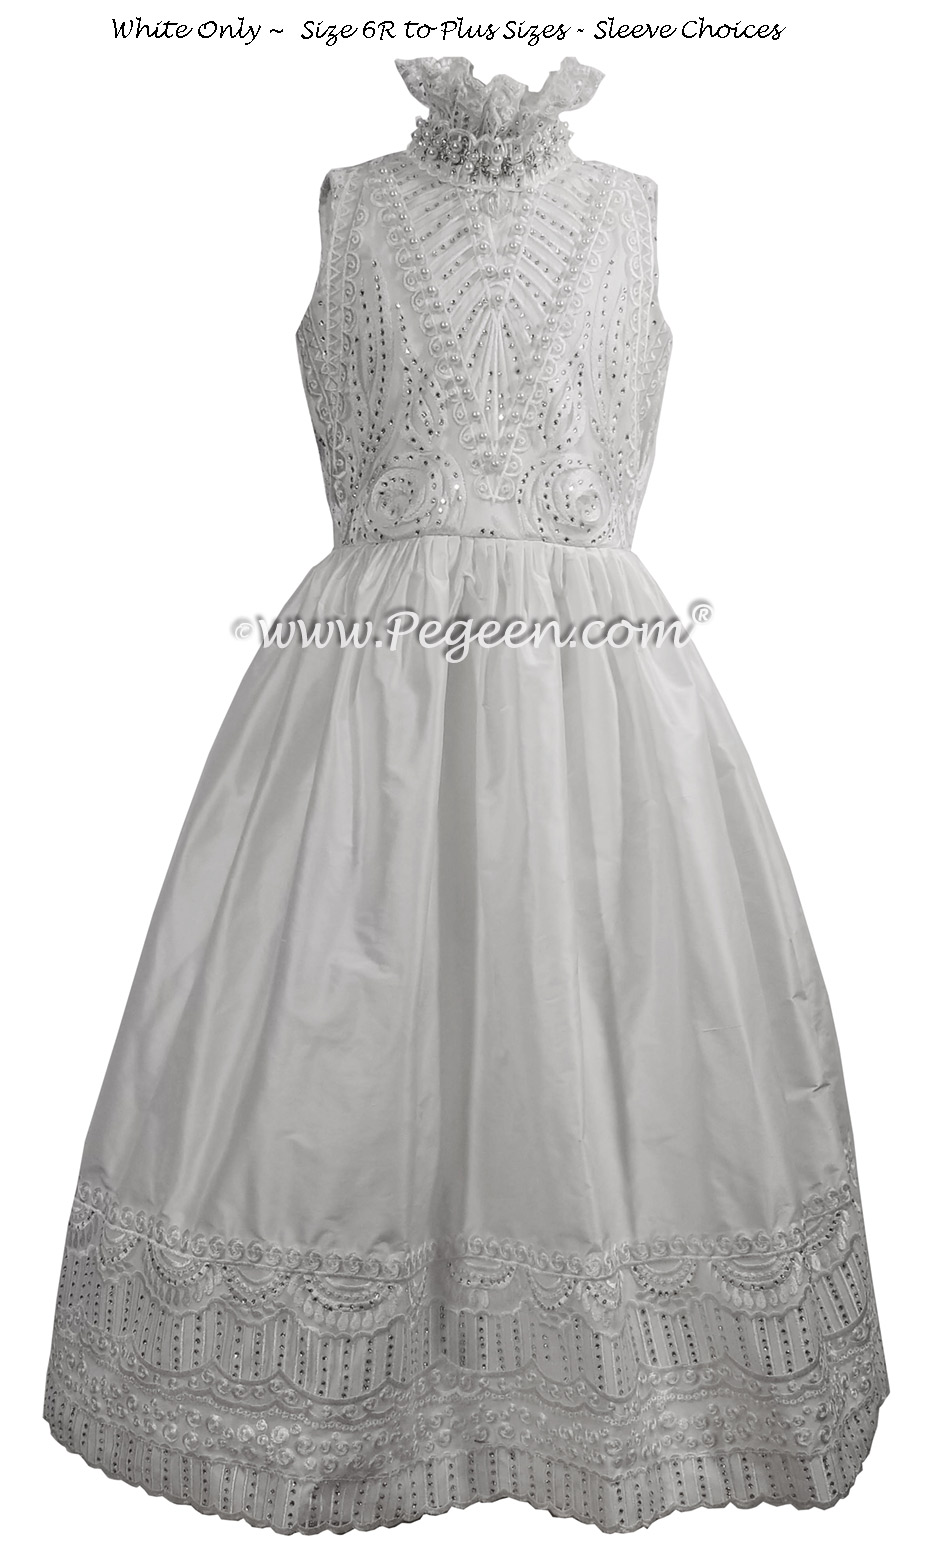 White Pearled Bodice First Communion Dresses Style 960